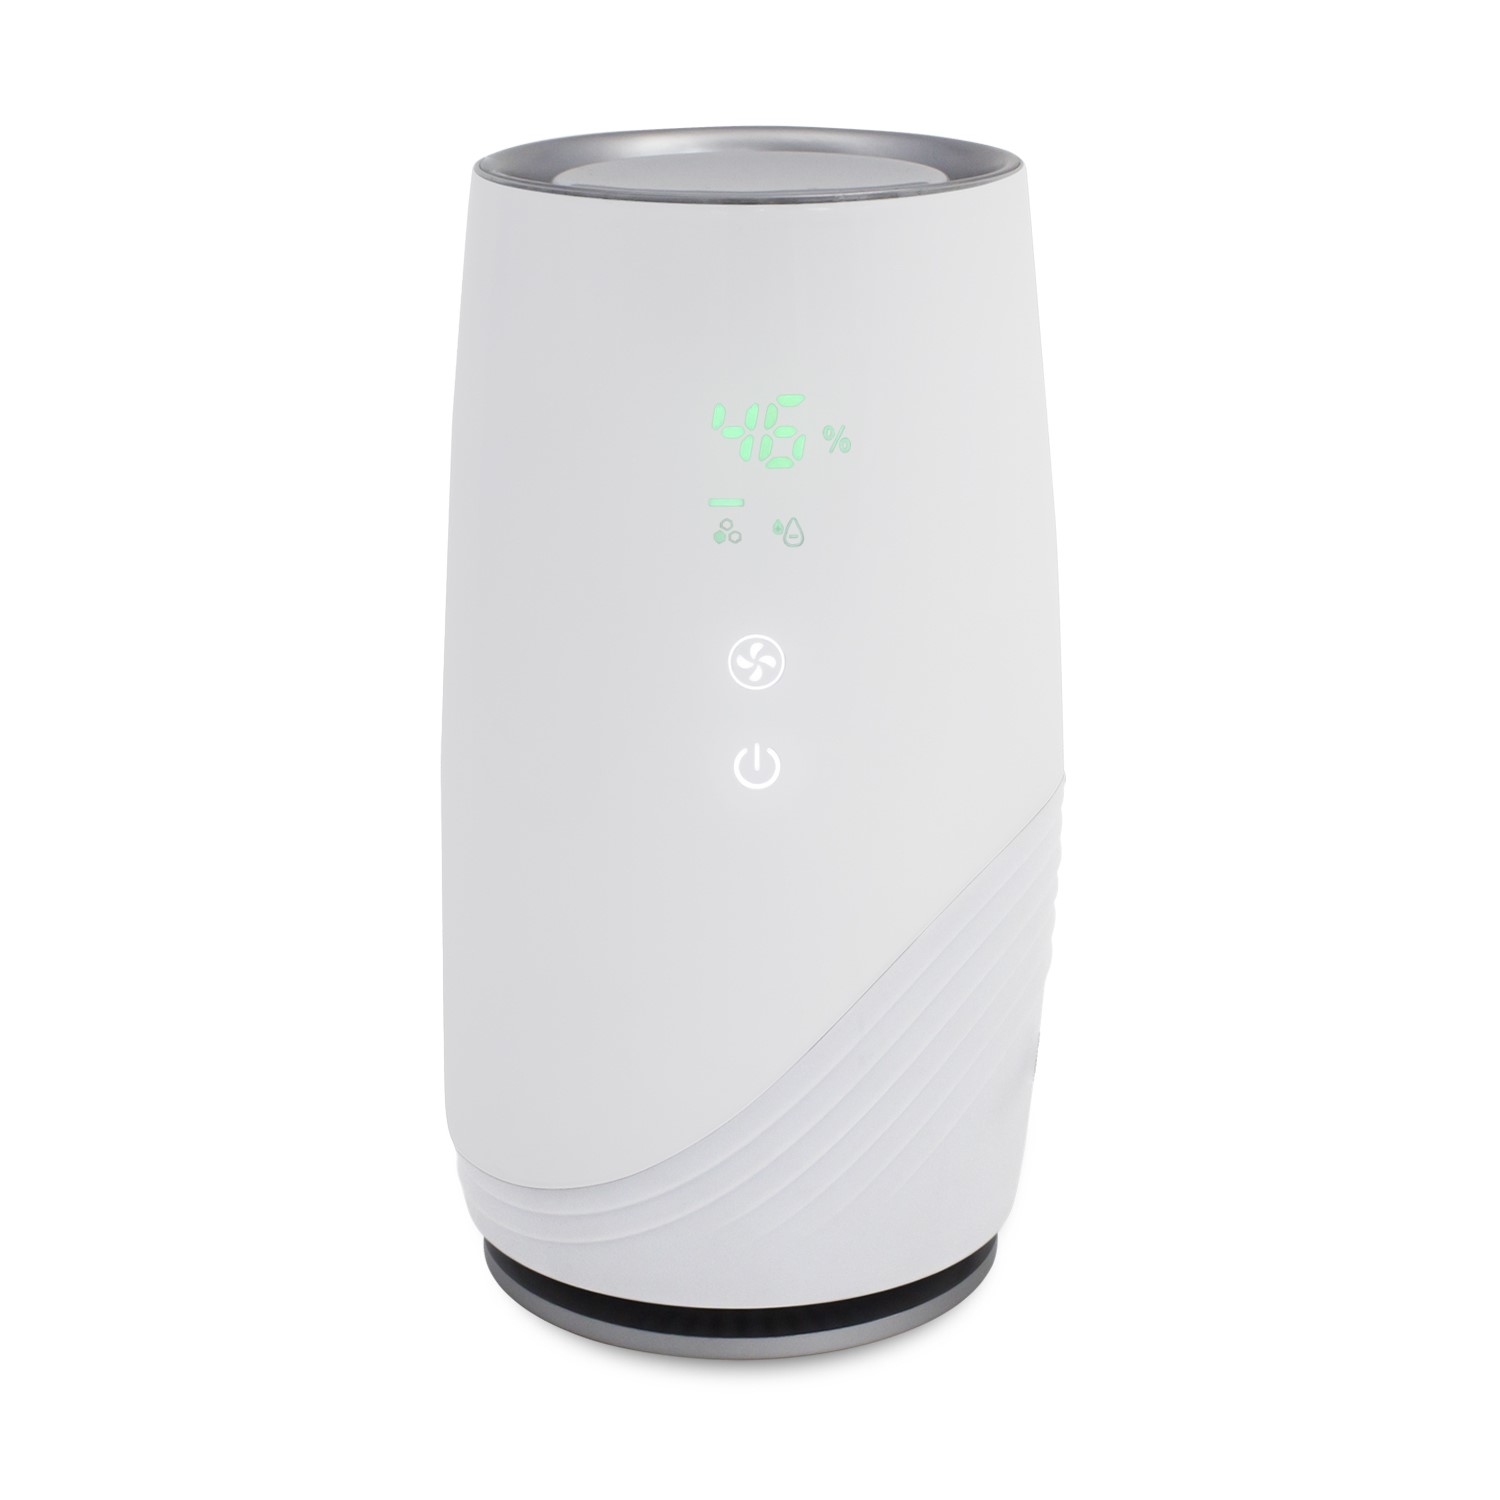 Quiet HEPA Air Purifier with Anti-Bacterial Filter - EAP100D